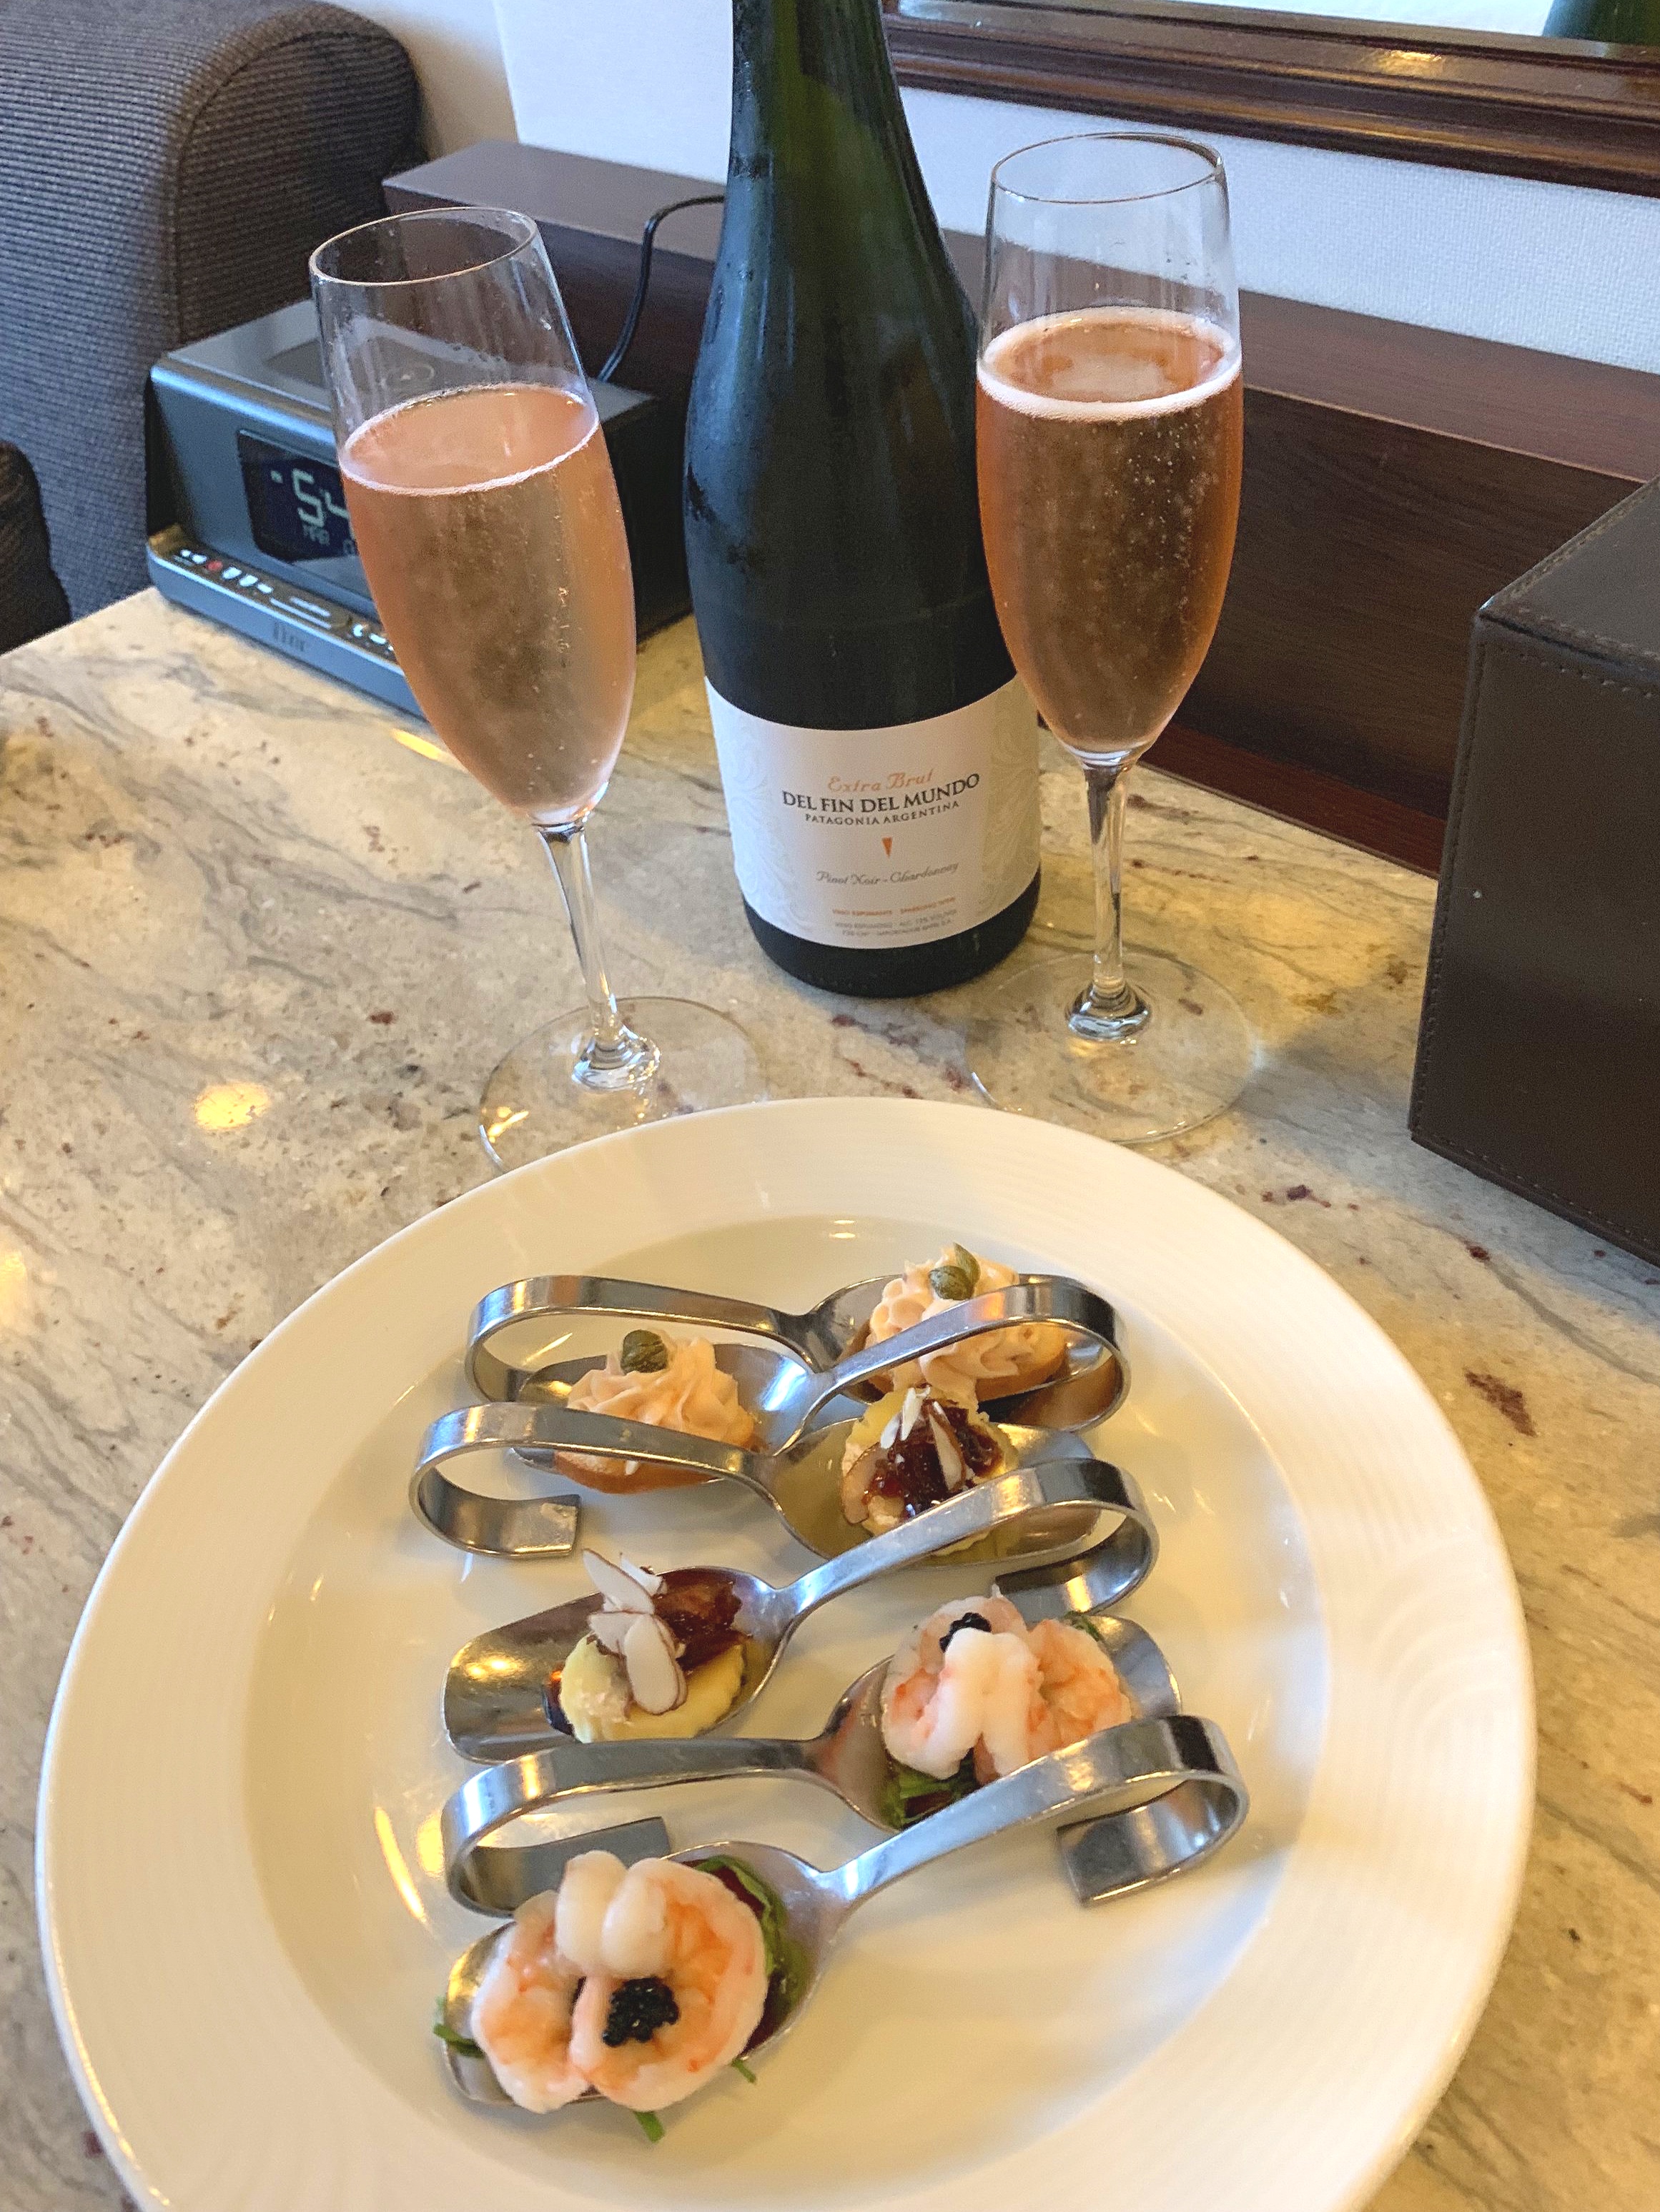  Champagne and canapés were waiting for us in our suite upon our return.  